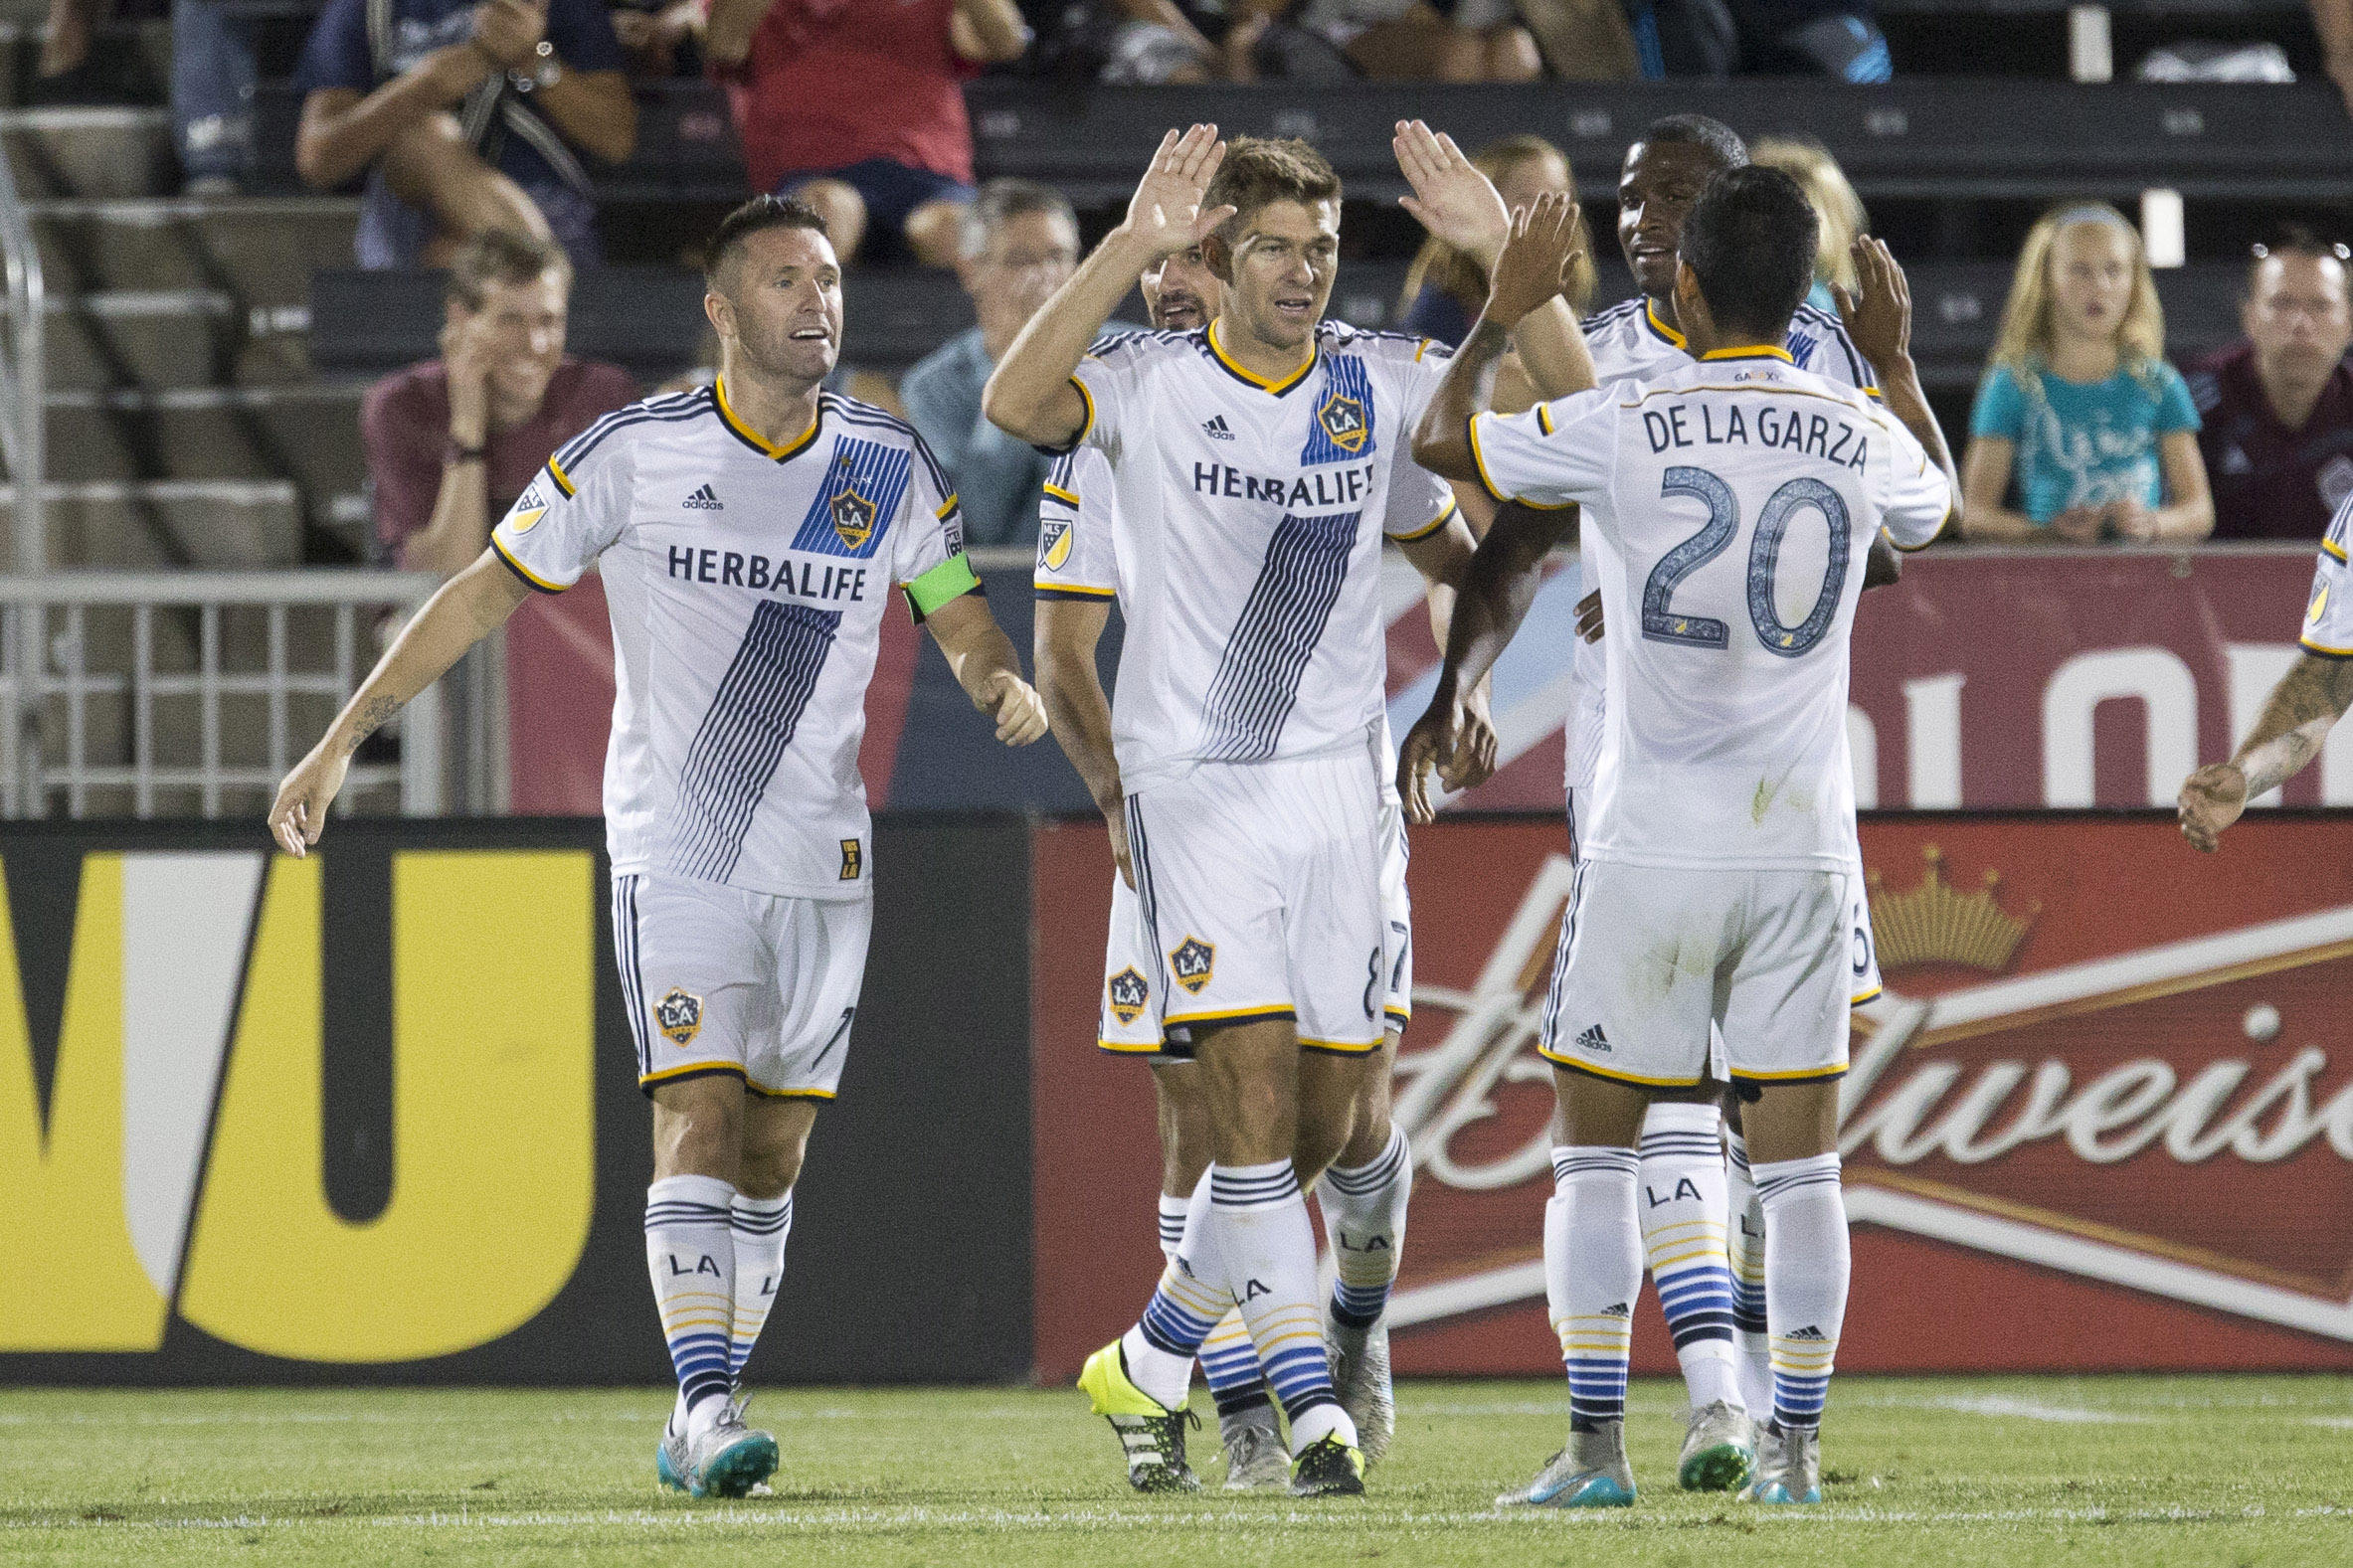 Aug 1, 2015; Commerce City, CO, USA; Los Angeles Galaxy midfielder Steven Gerrard (8) and defender A.J. DeLaGarza (20) celebrate the goal of forward Robbie Keane (7) in the second half against the Colorado Rapids at Dick's Sporting Goods Park. Mandatory Credit: Isaiah J. Downing-USA TODAY Sports